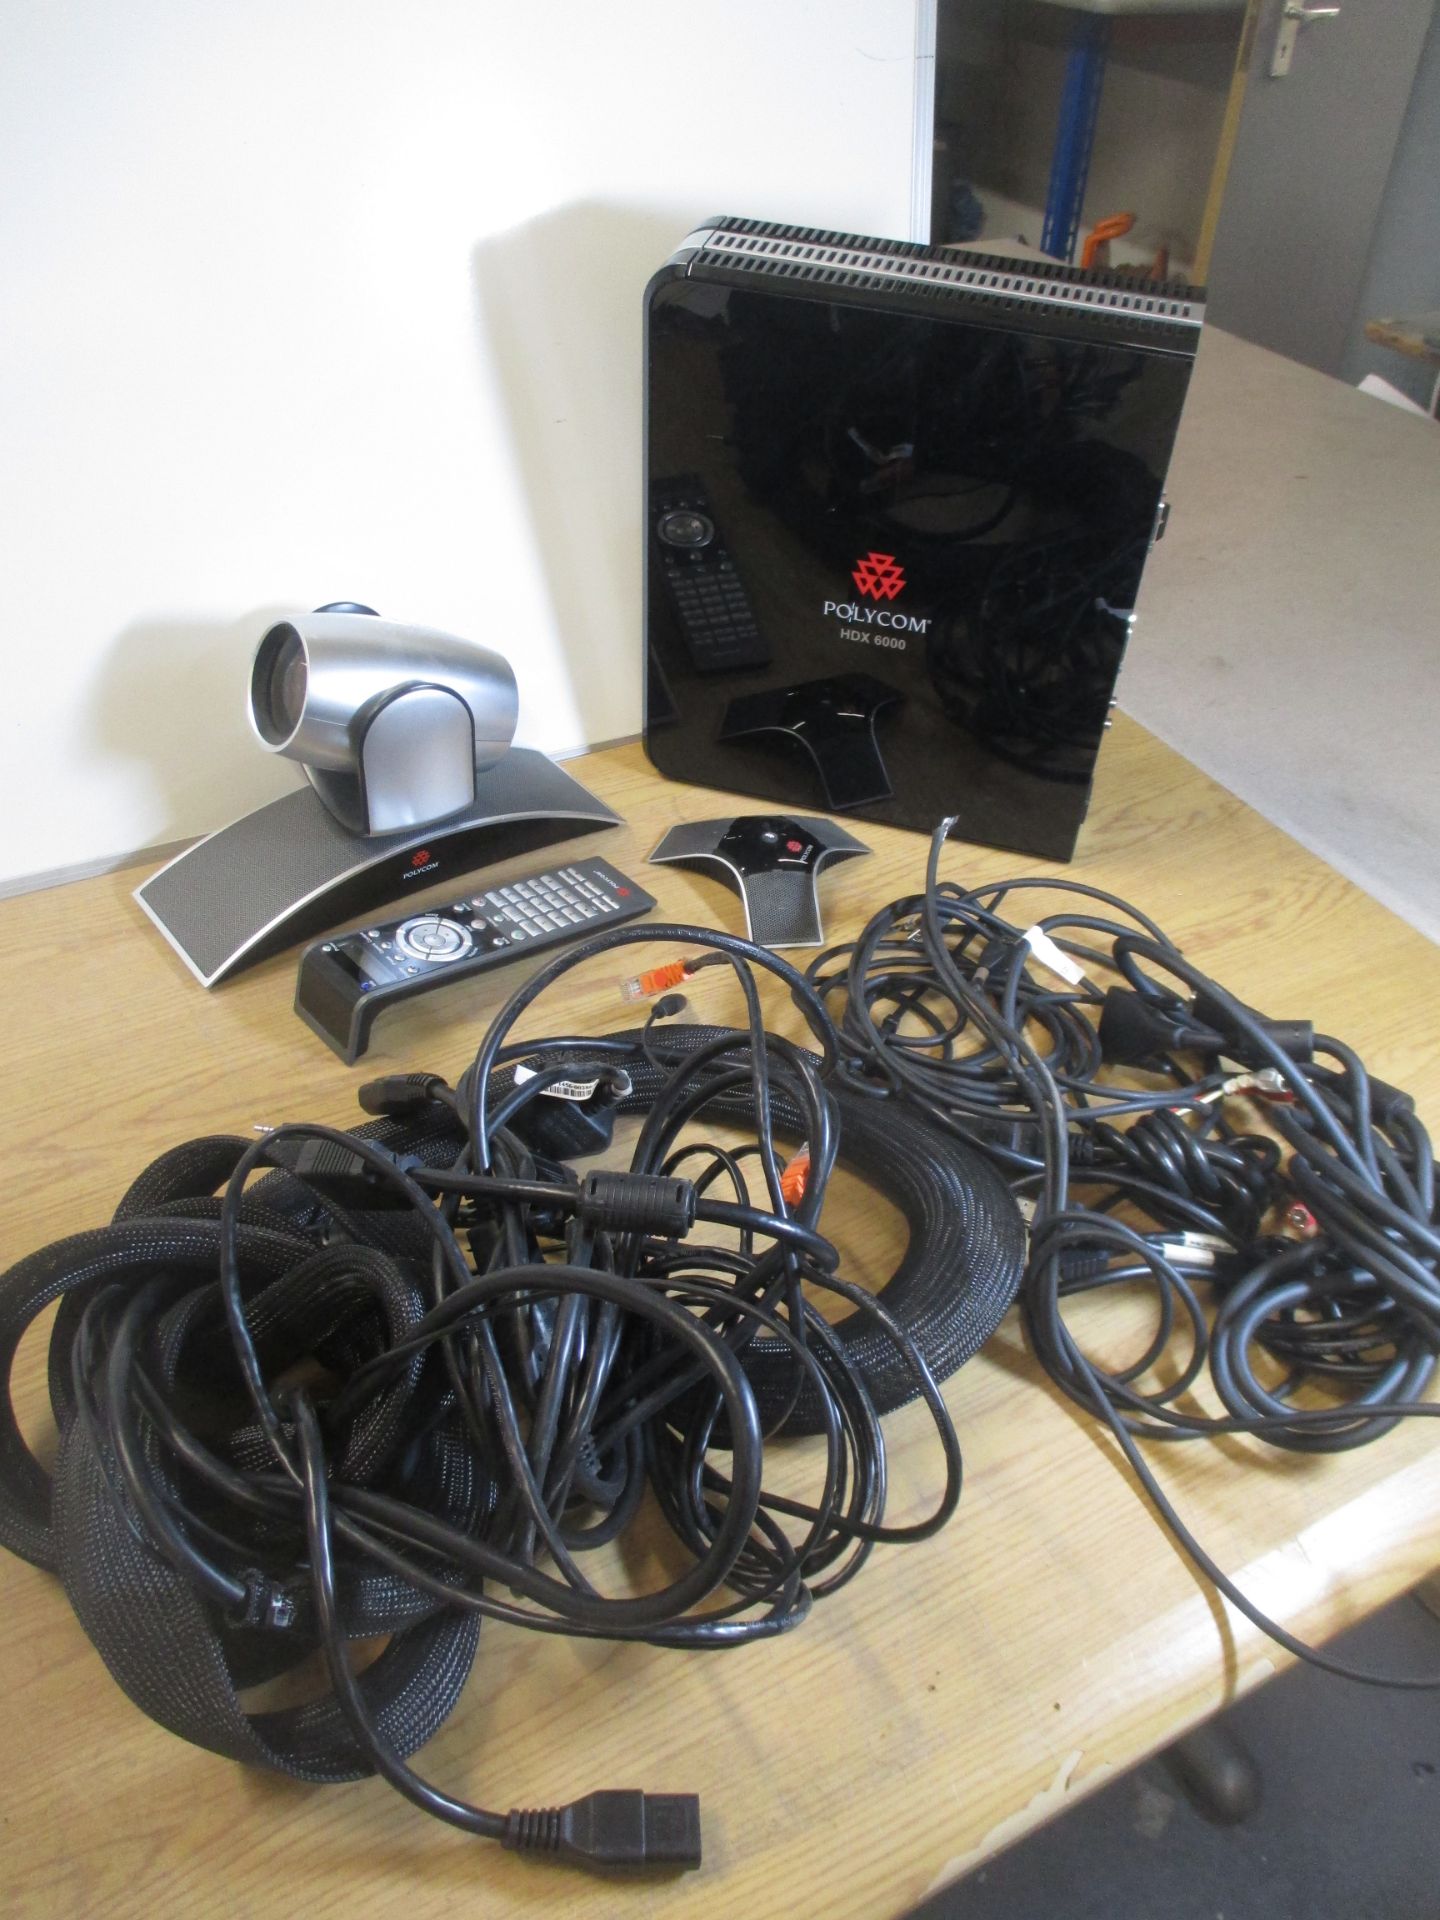 POLYCOM VIDEO CONFERENCING SYSTEM COMPRISING: HDX-6000-HD PAL CODEC, MPTZ-9 CAMERA, MICROPHONE, - Image 2 of 2